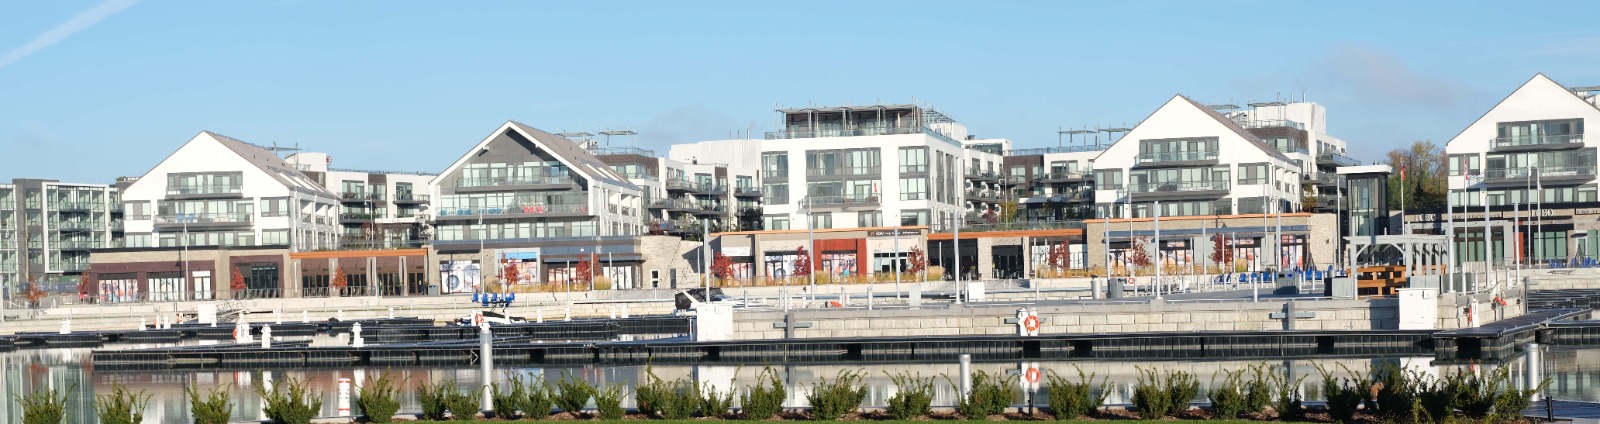 Condos and shops at Friday Harbour